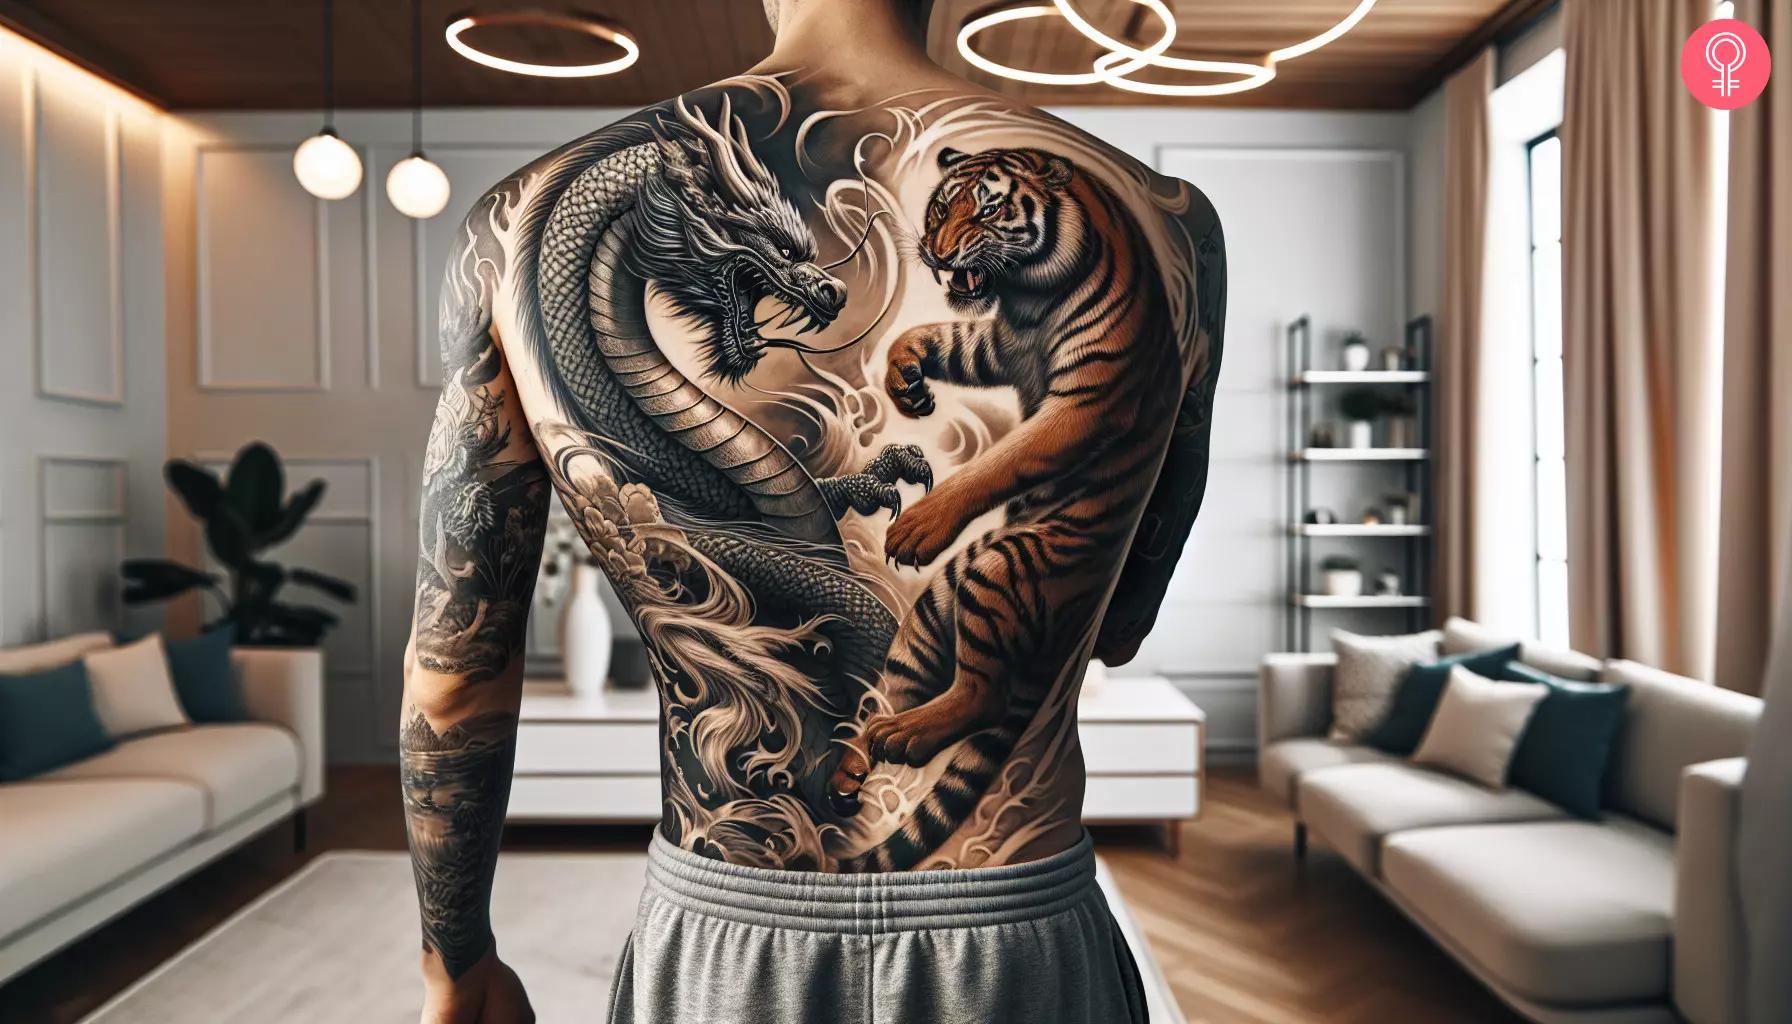 An elaborate tattoo of a dragon and a tiger on the back of a man